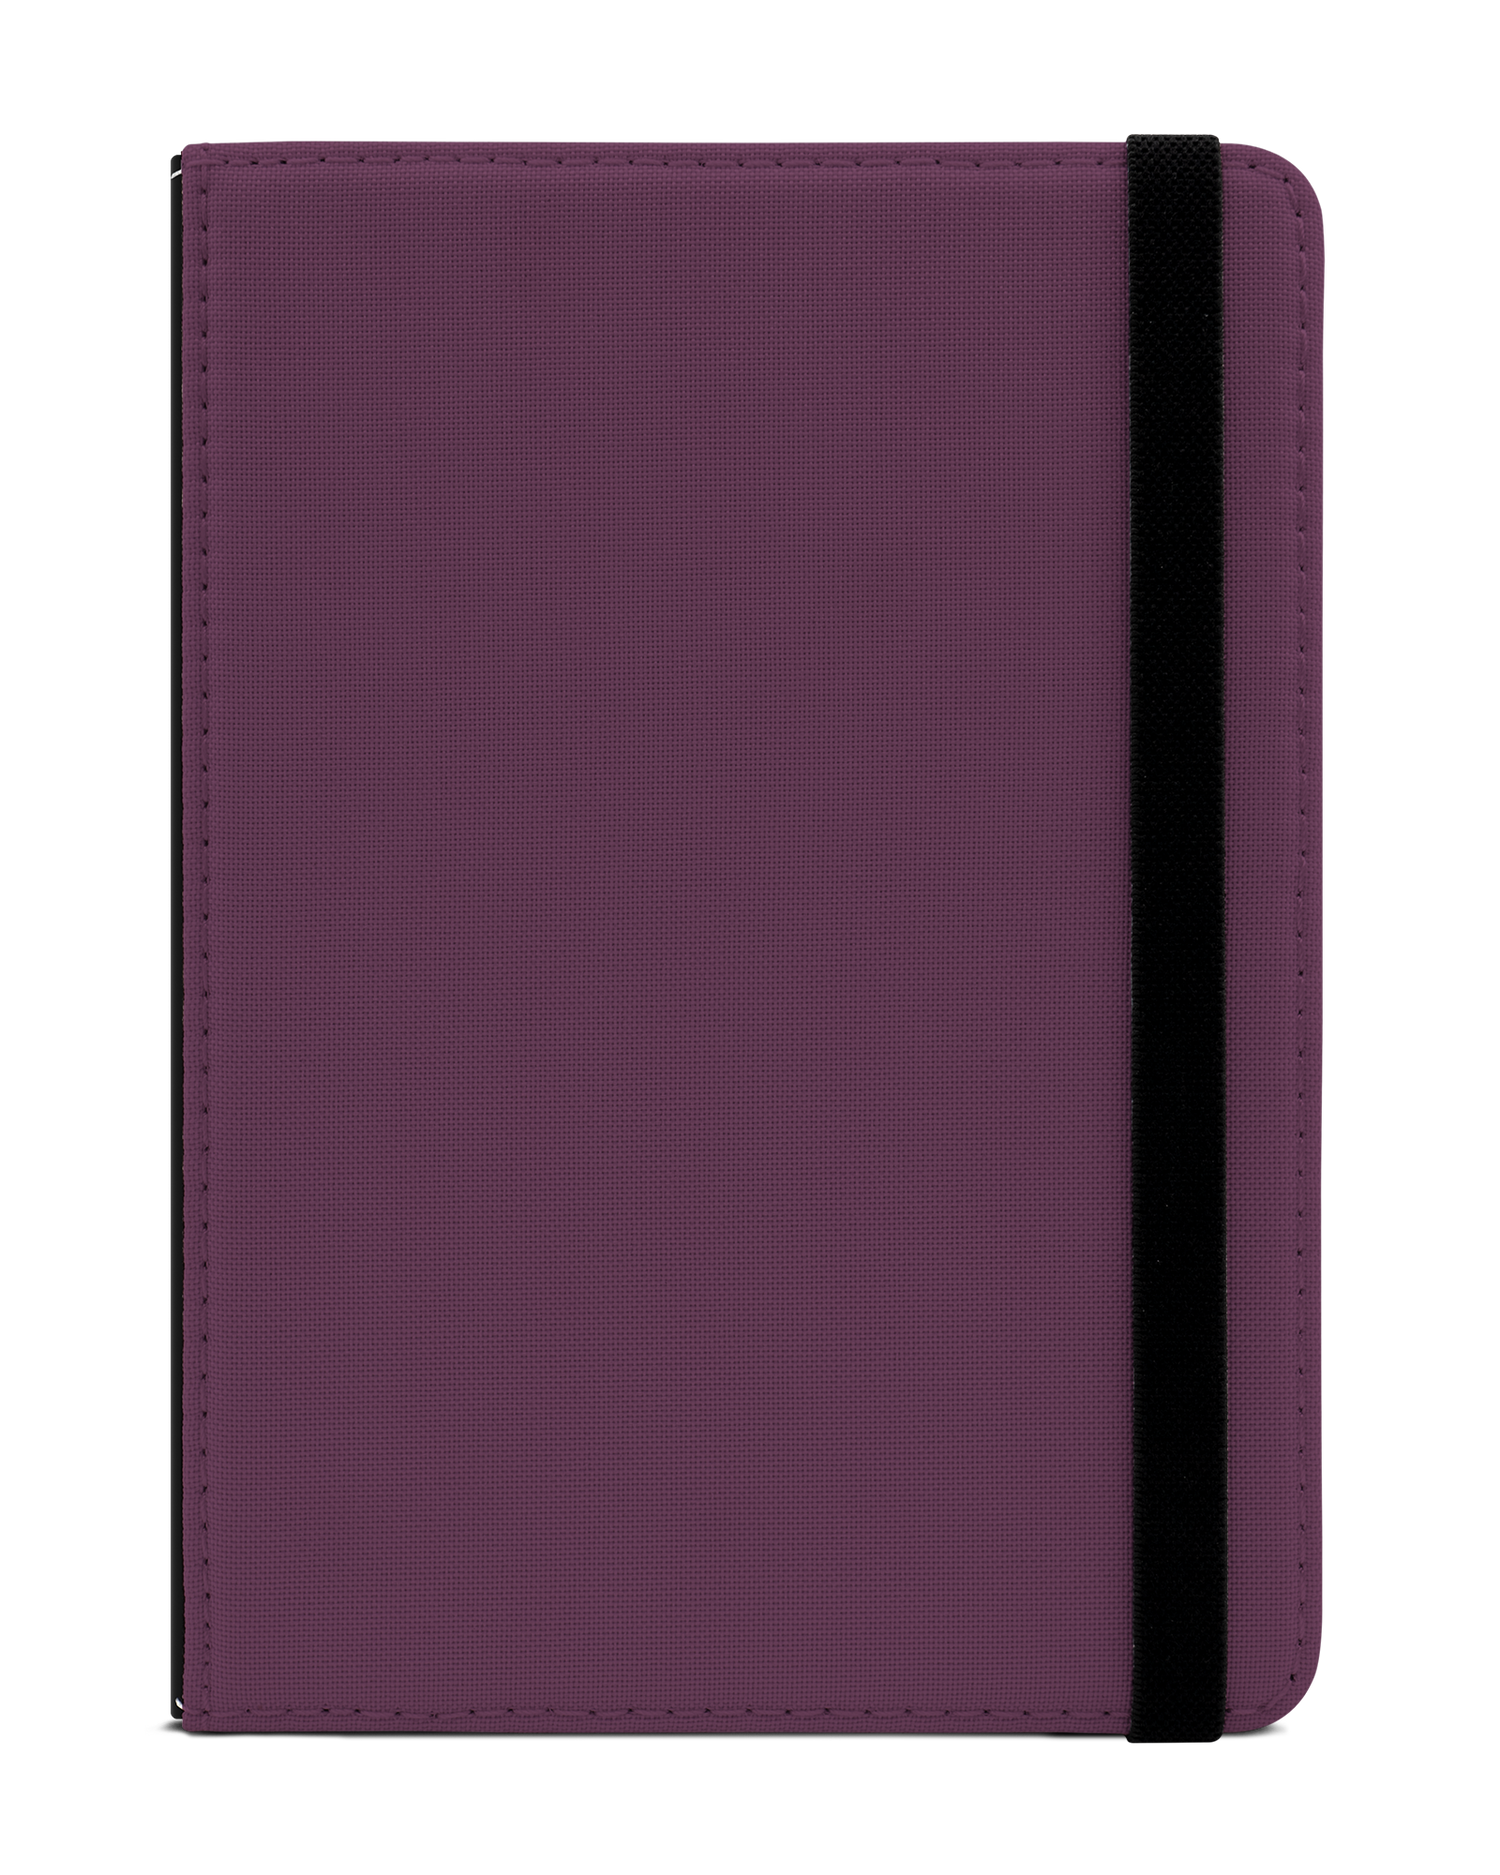 PLUM eReader Case for tolino vision 1 to 4 HD: Front View